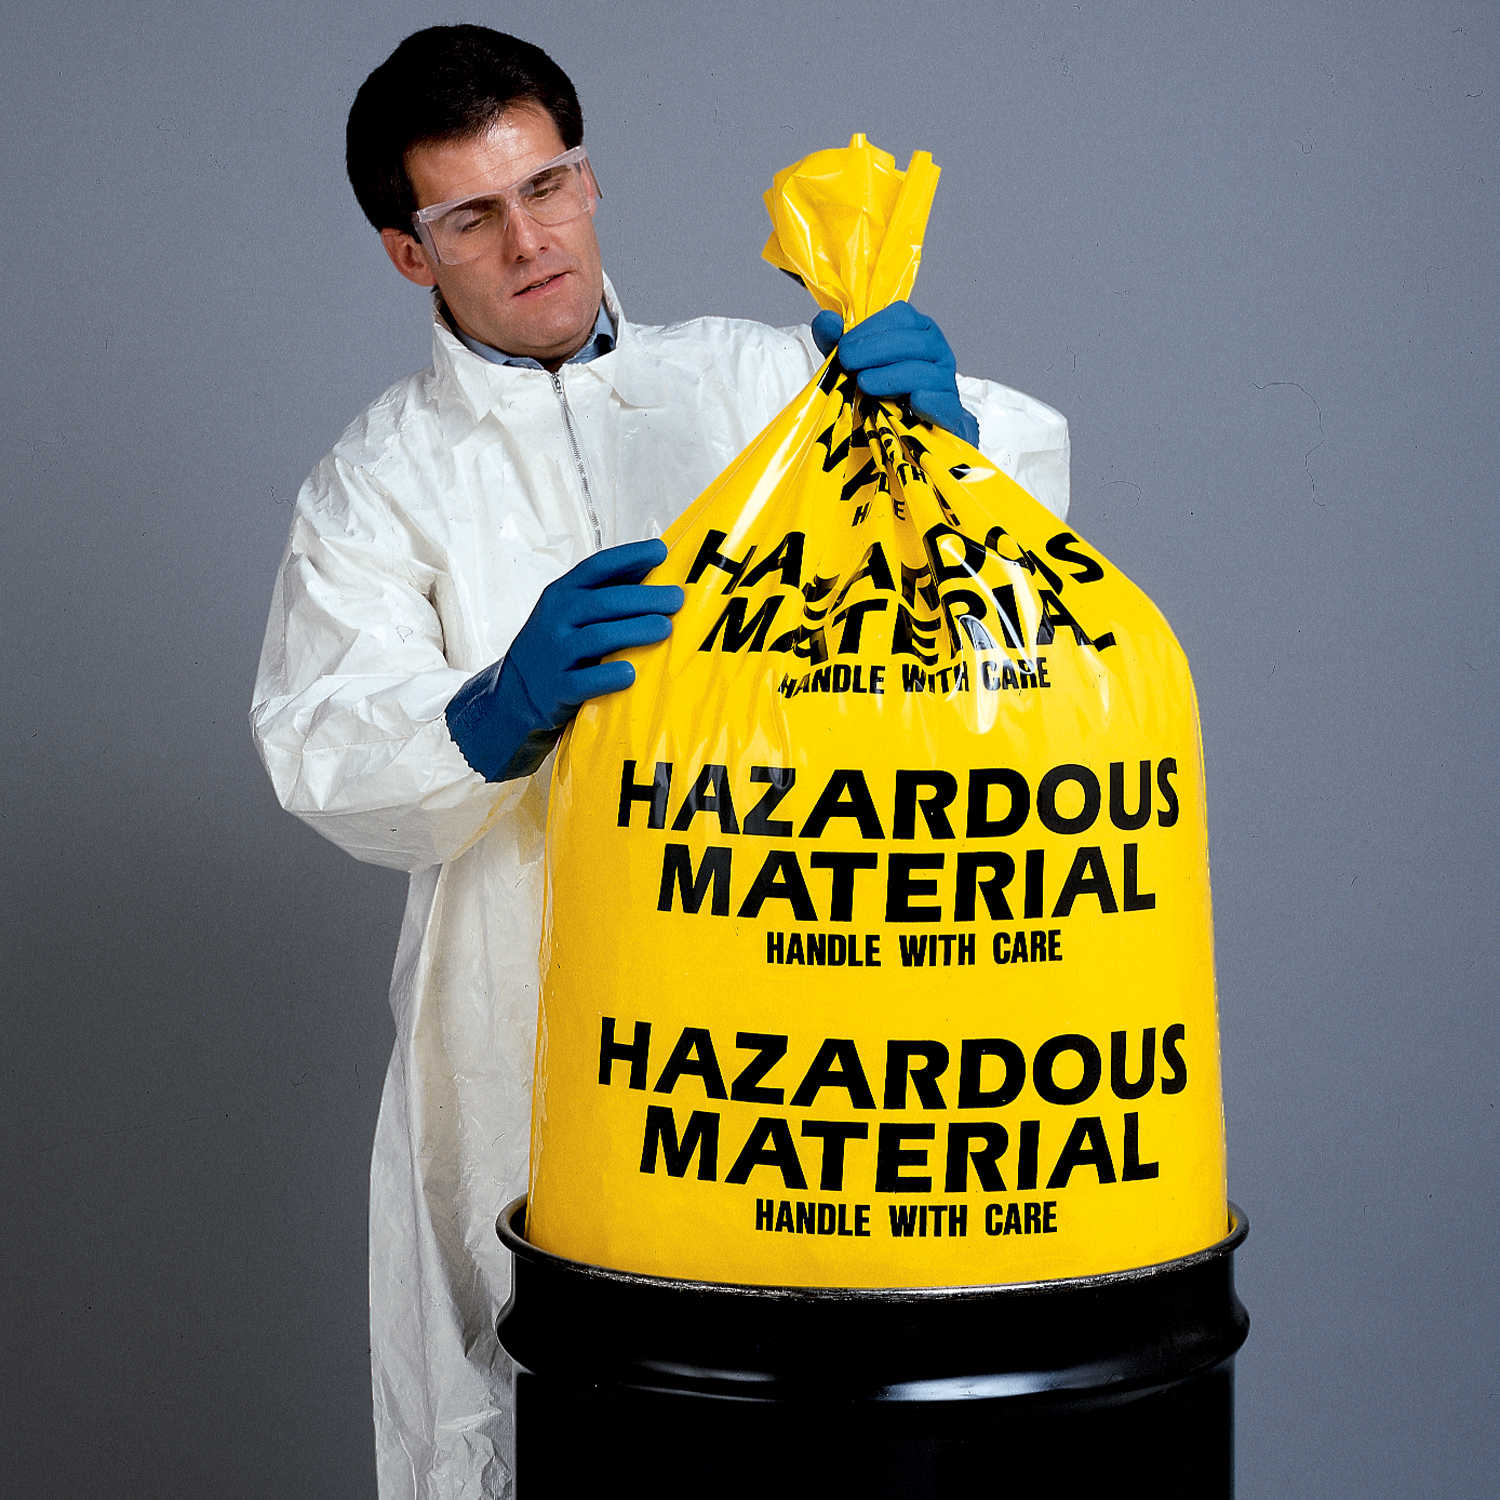 Hazardous Material Disposal Bags | Forestry Suppliers, Inc.